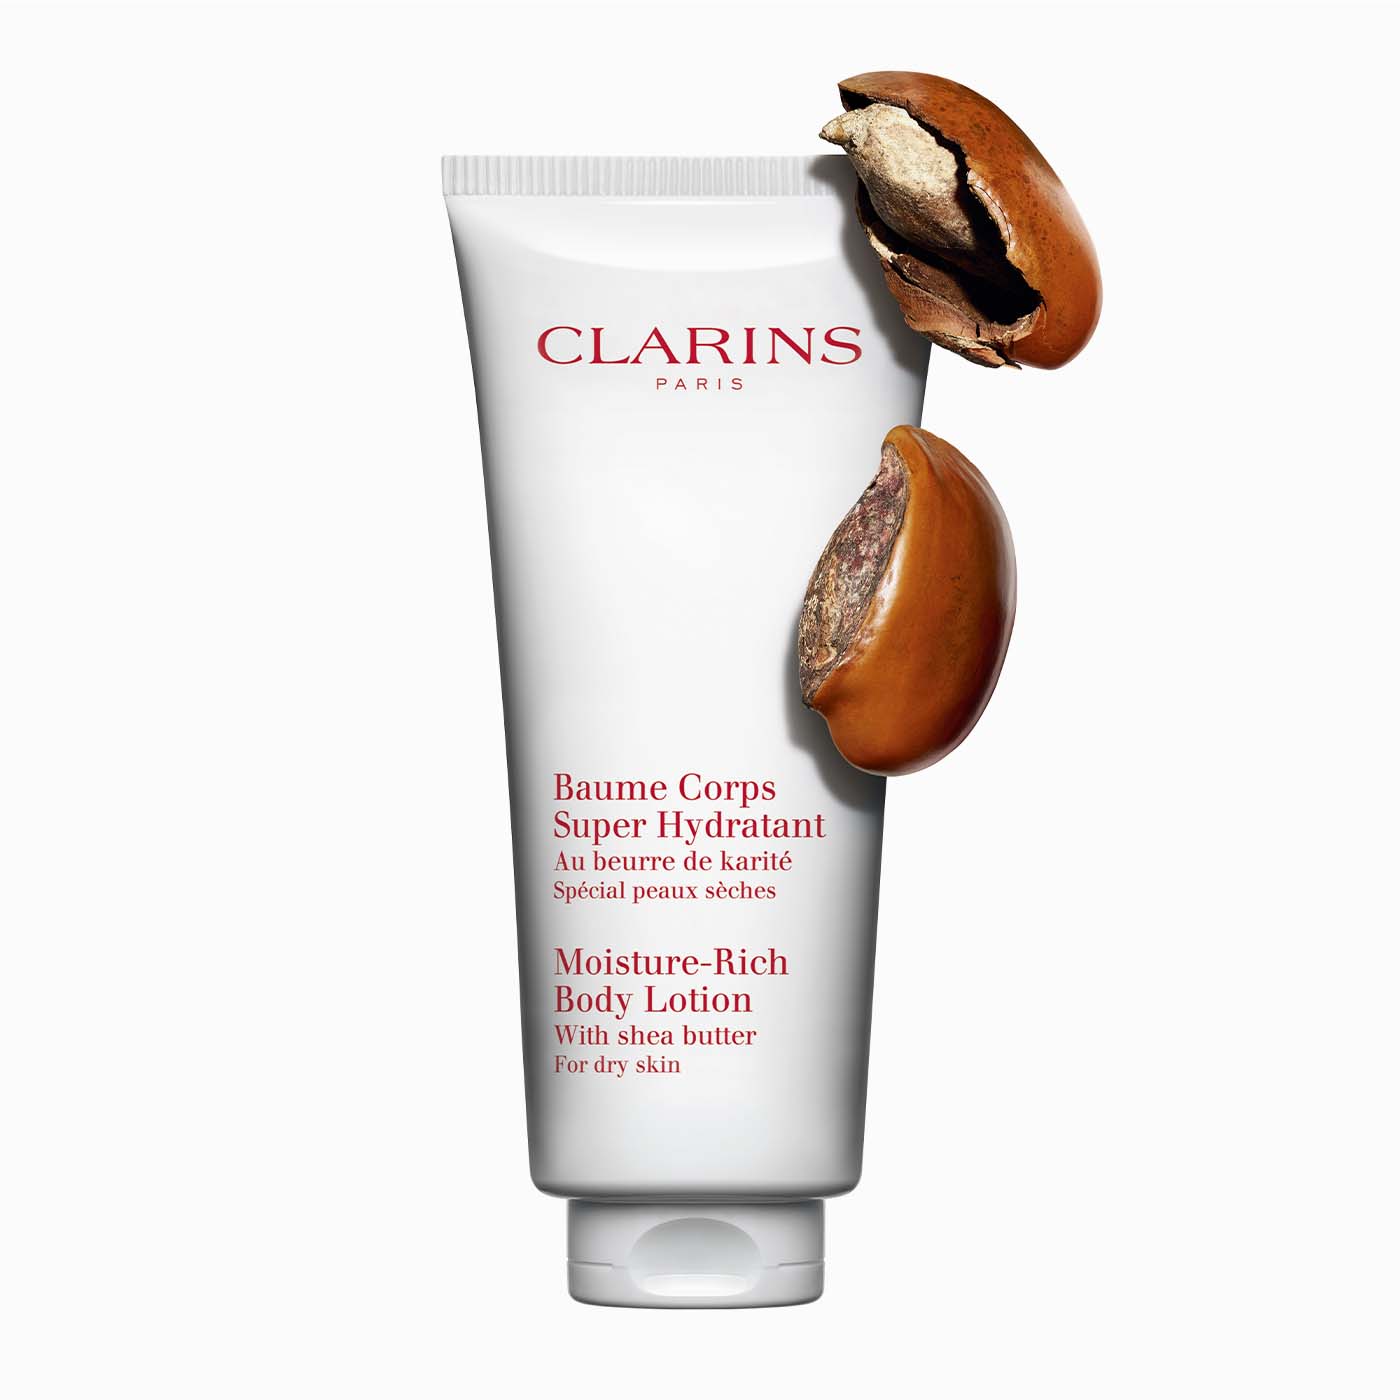 Moisture-Rich Body Lotion Luxury Lotion | Non-Greasy CLARINS® 